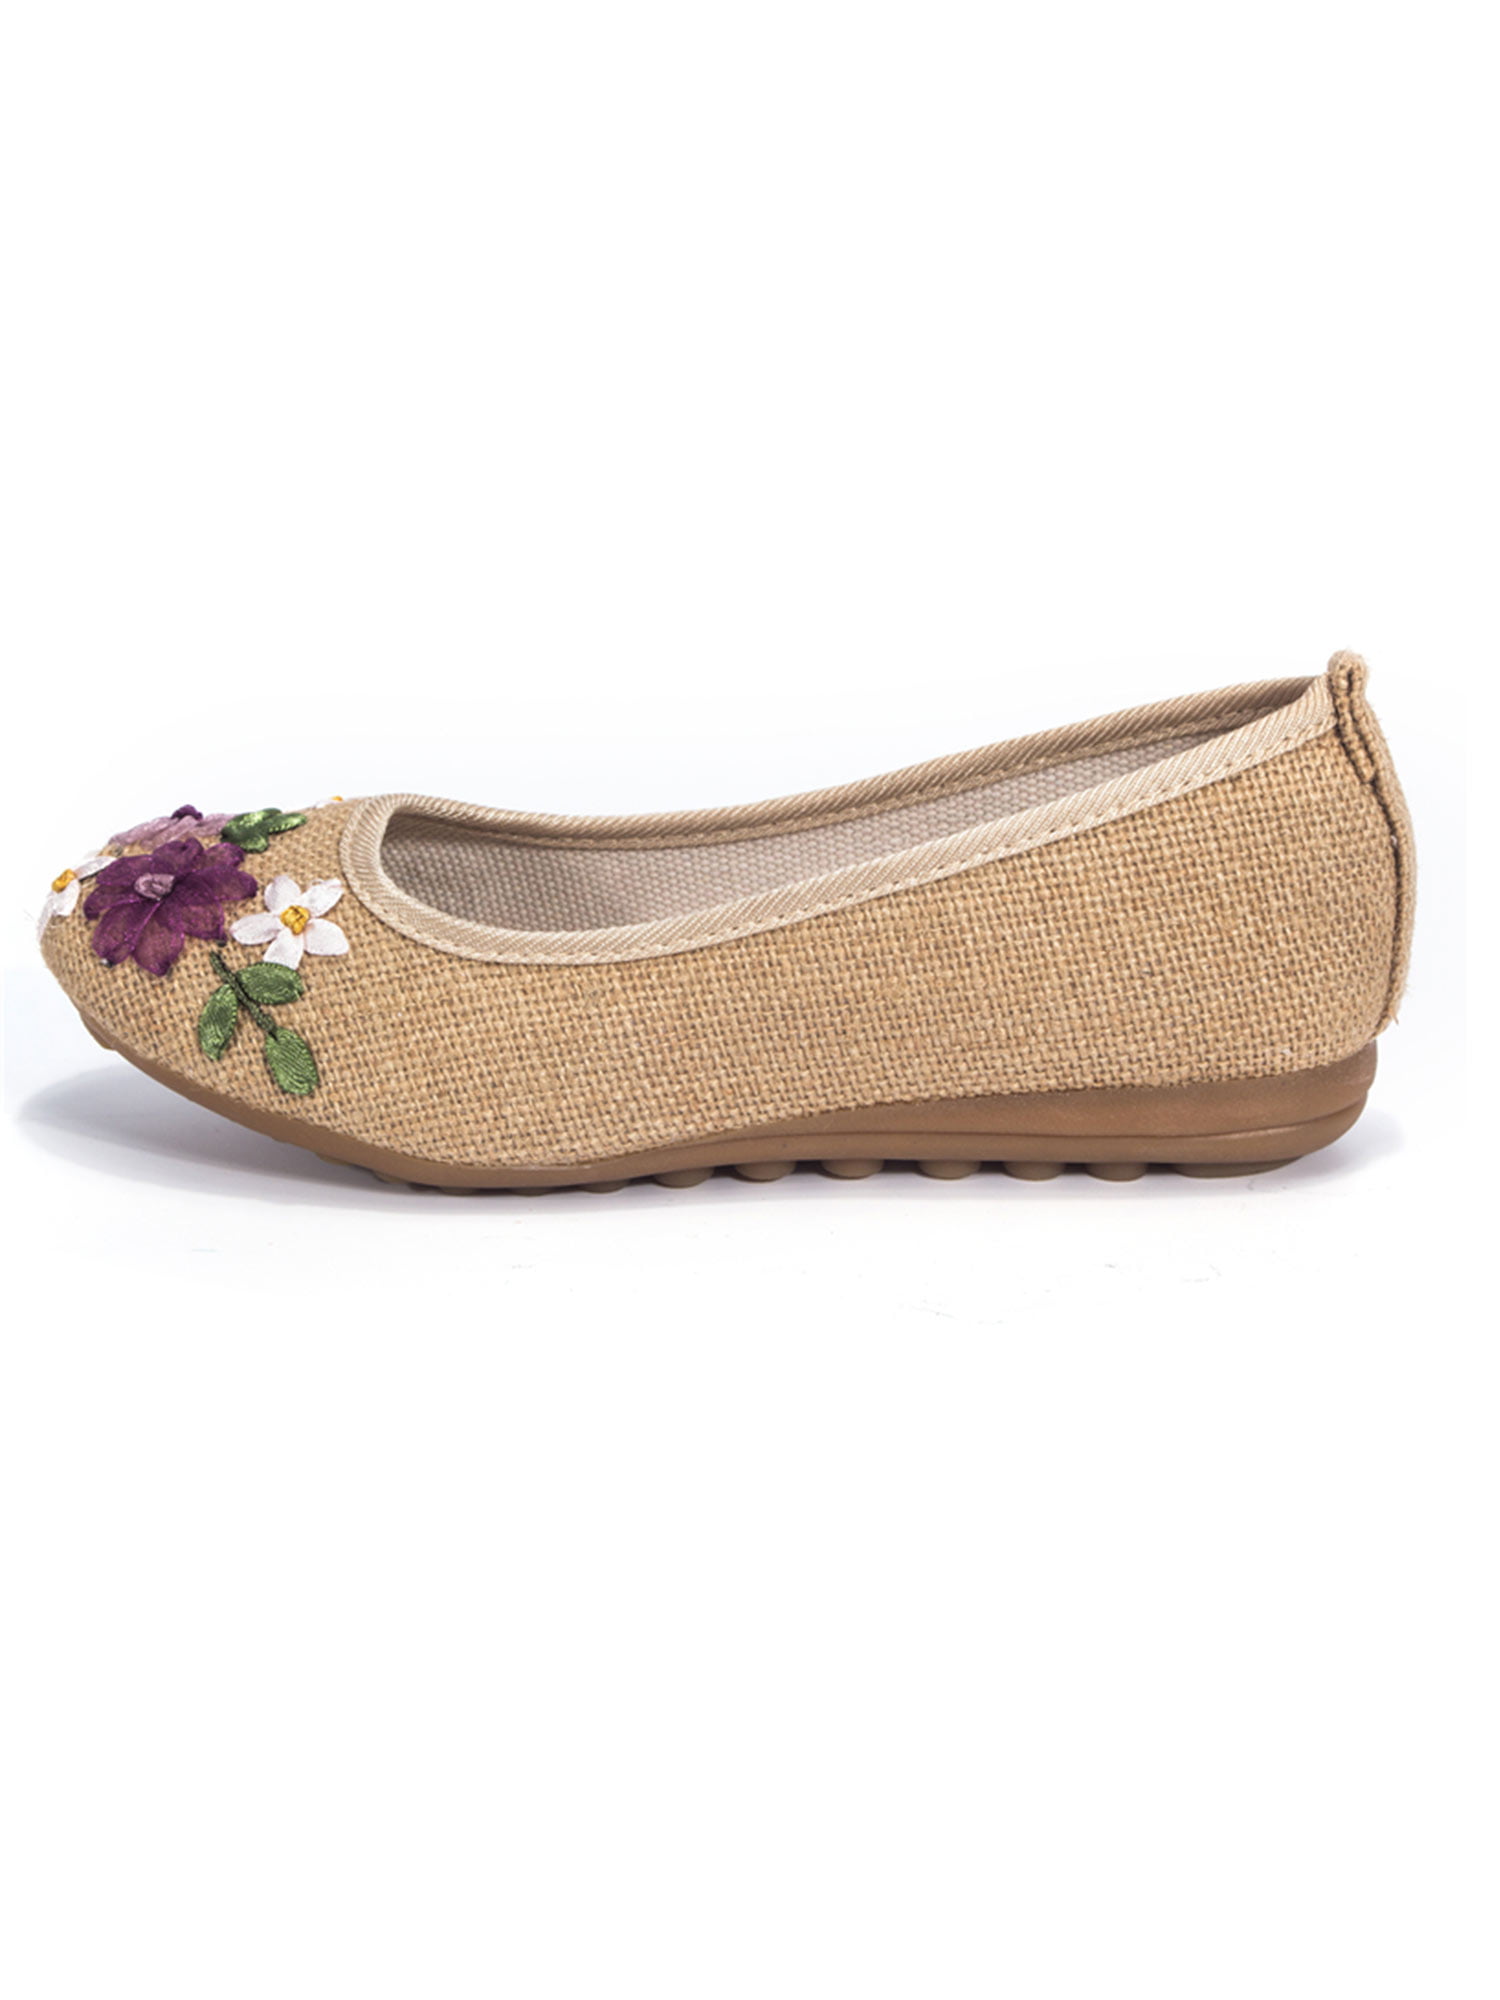 Womens Embroidered Loafers Shoes Ladies Floral Slip On Ballerina Flat Pumps 3-8 